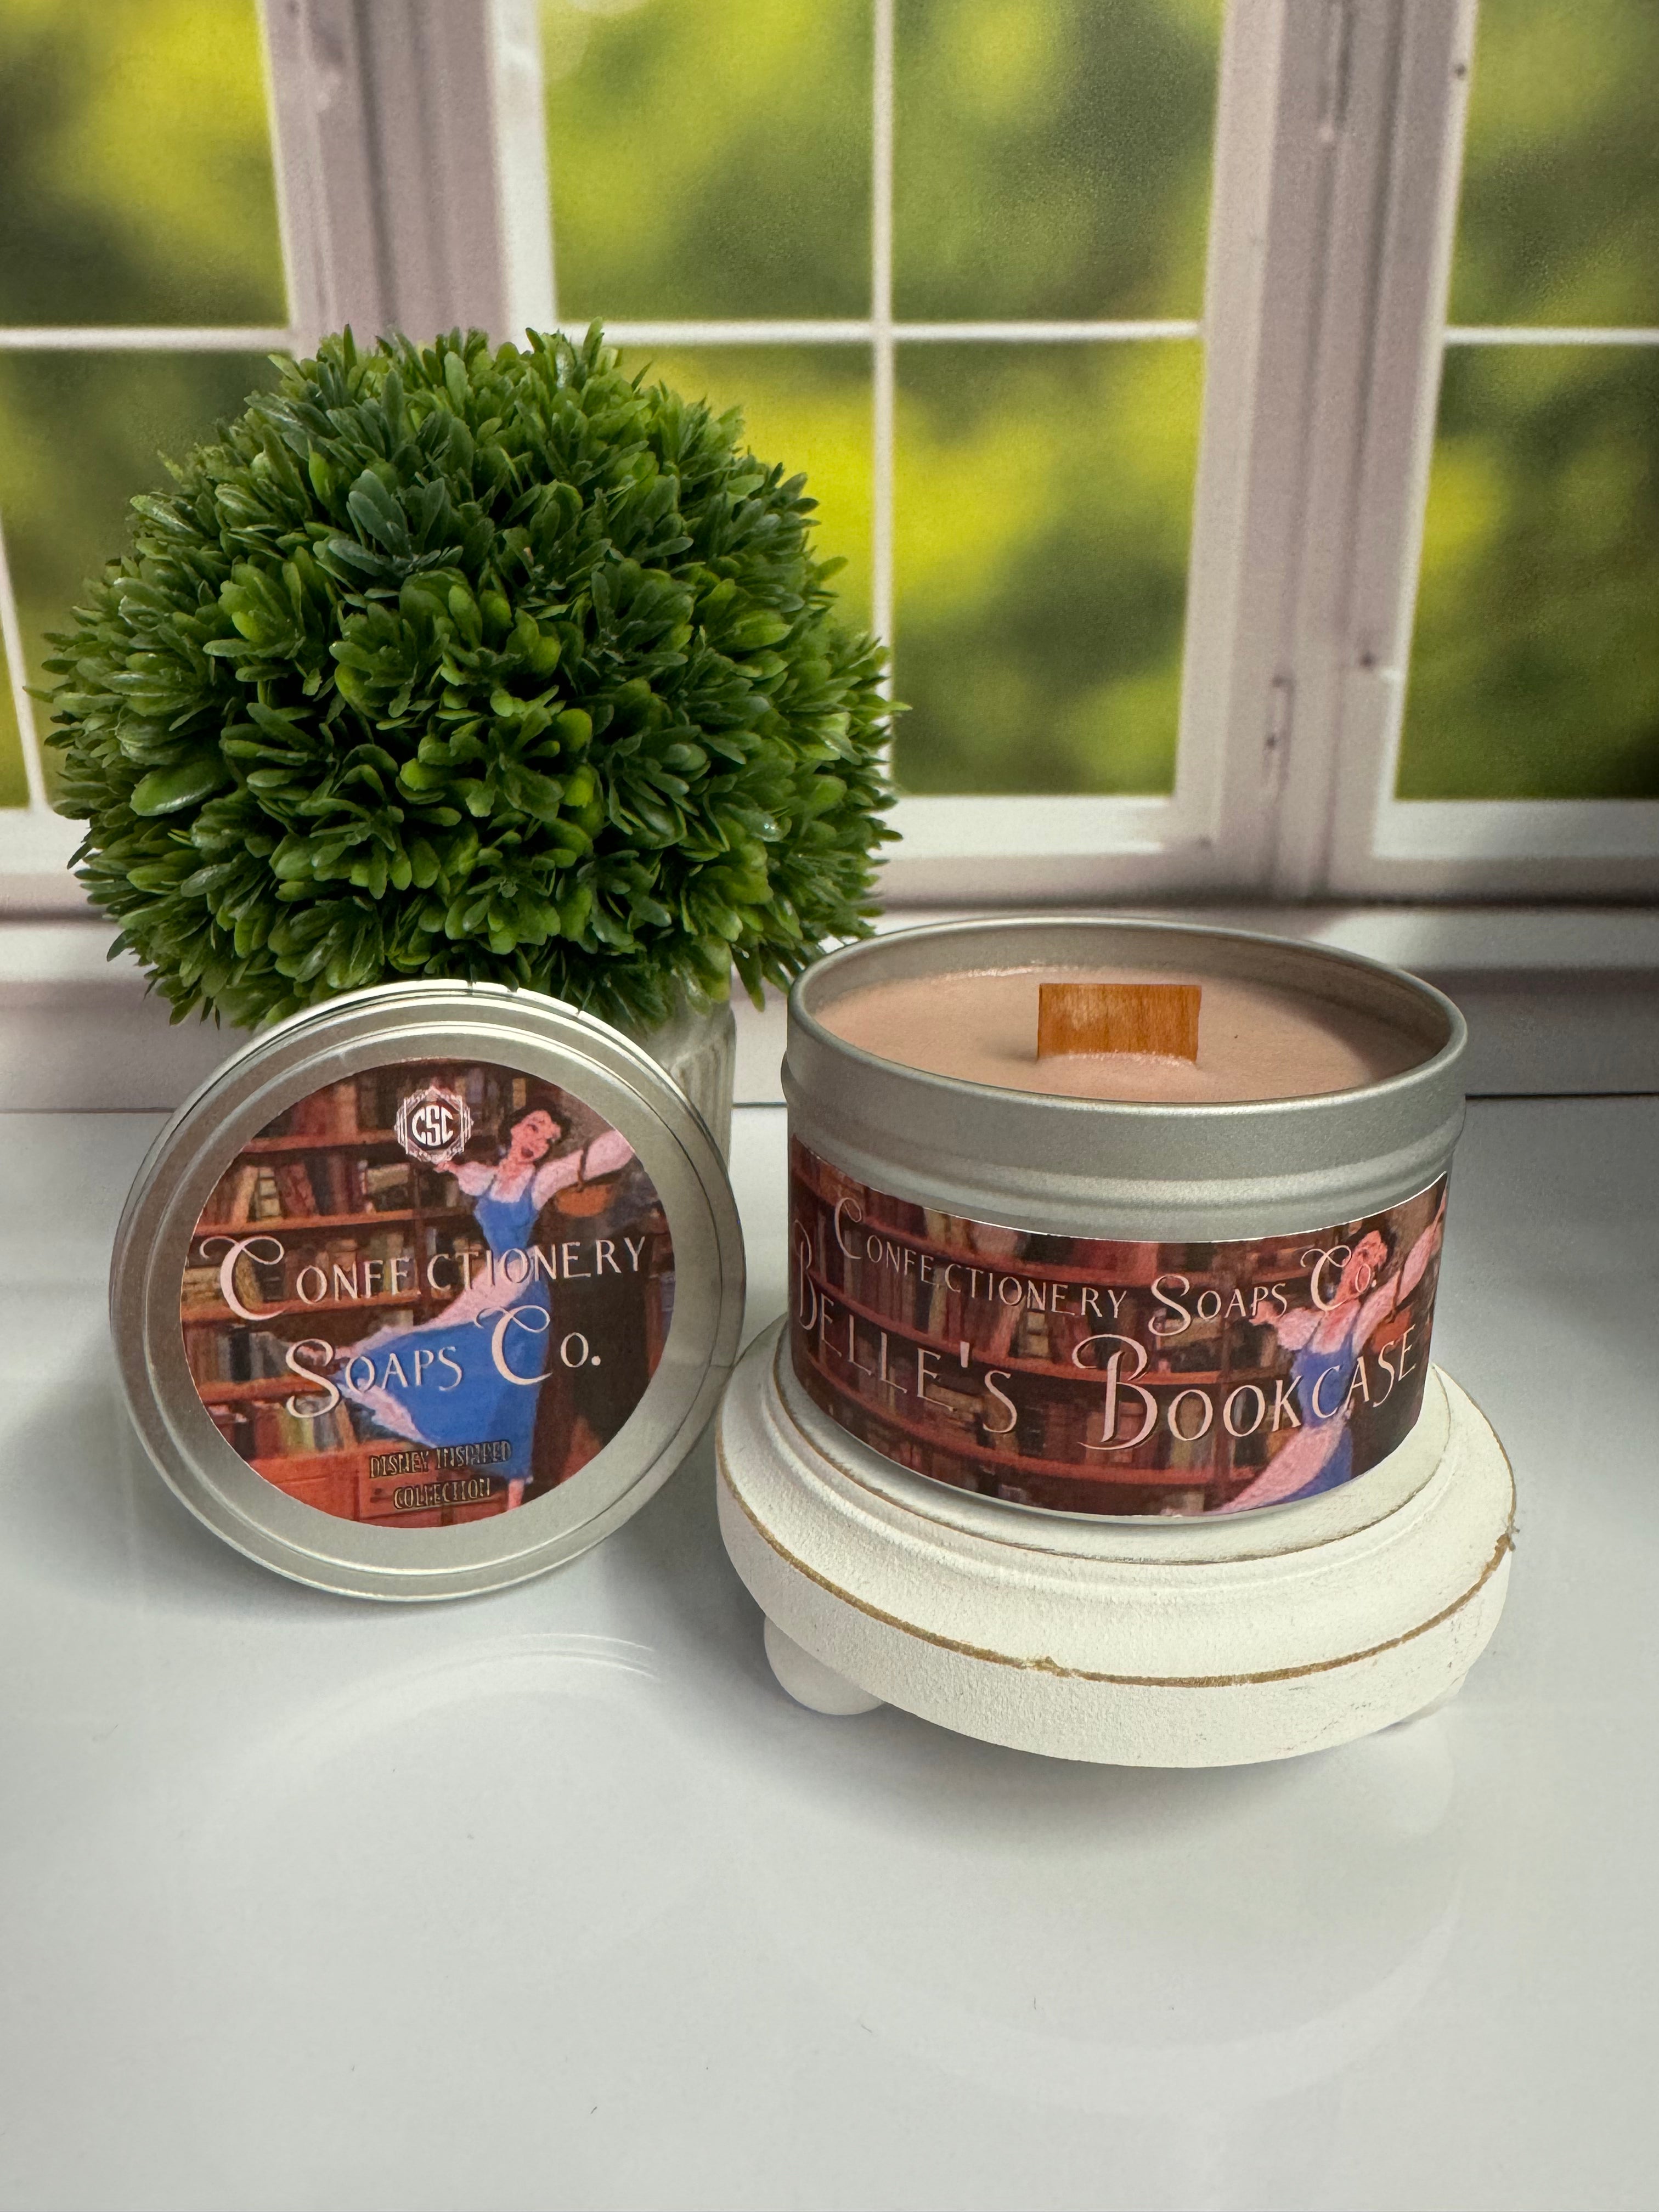 Belle's Bookcase Candle